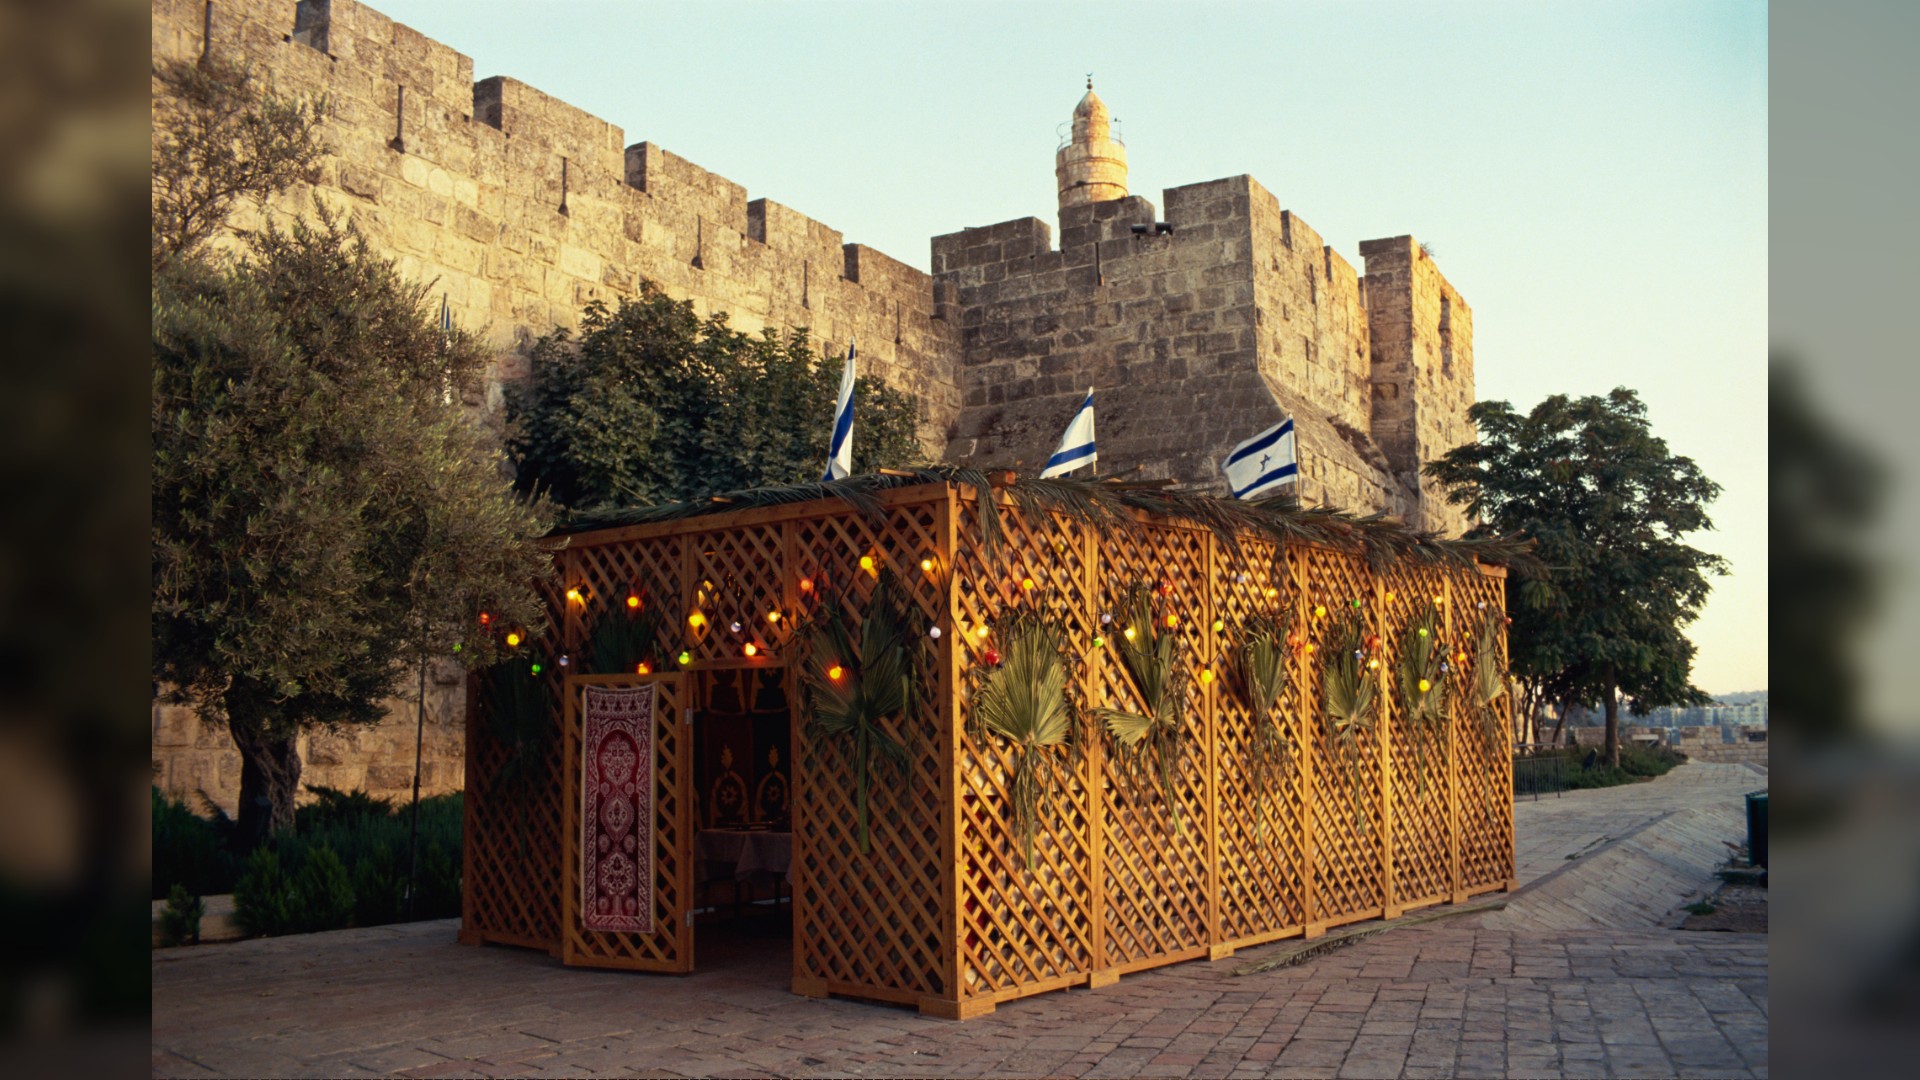 Here we see a Sukkot (a small wooden building/booth with Israel flags on top) in front of the Tower of David (stone wall citadel) in Jerusalem, Israel.